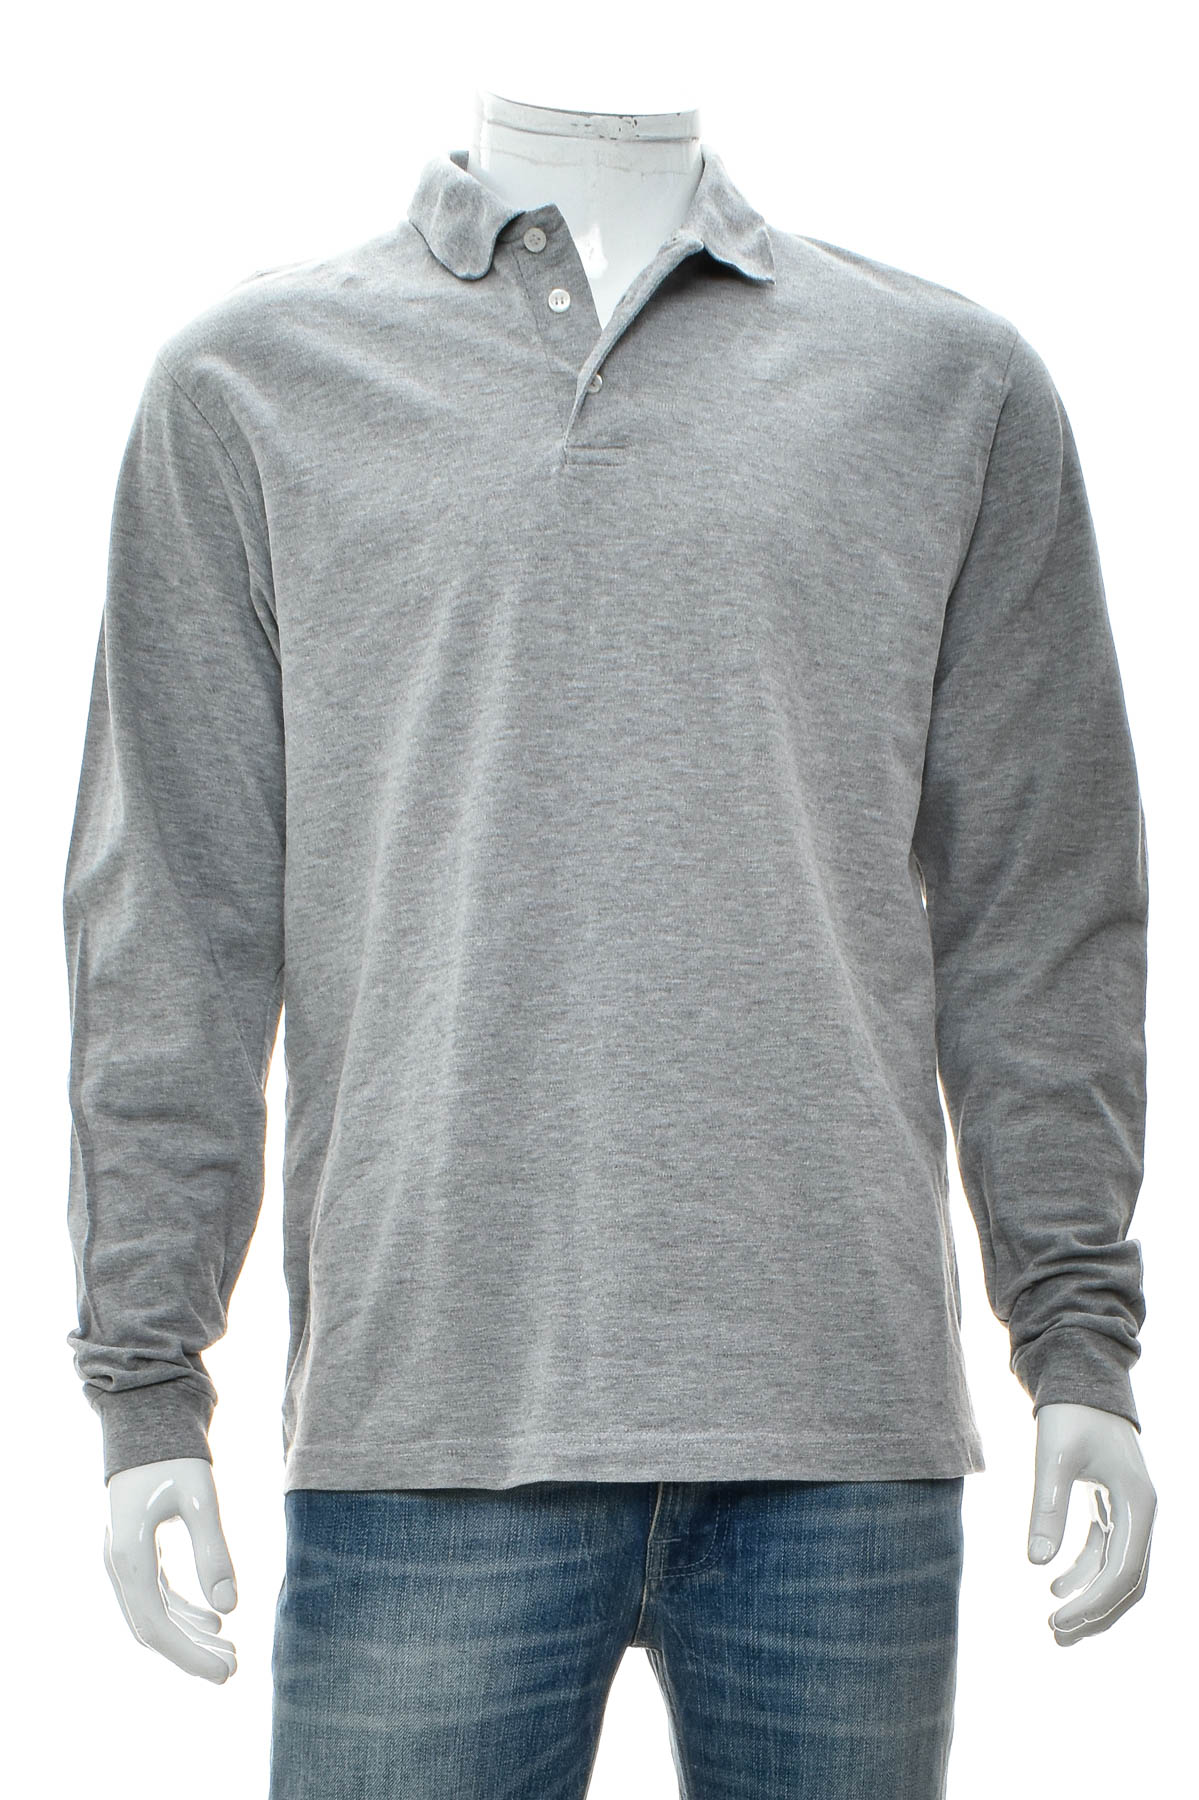 Men's sweater - B&C Collection - 0